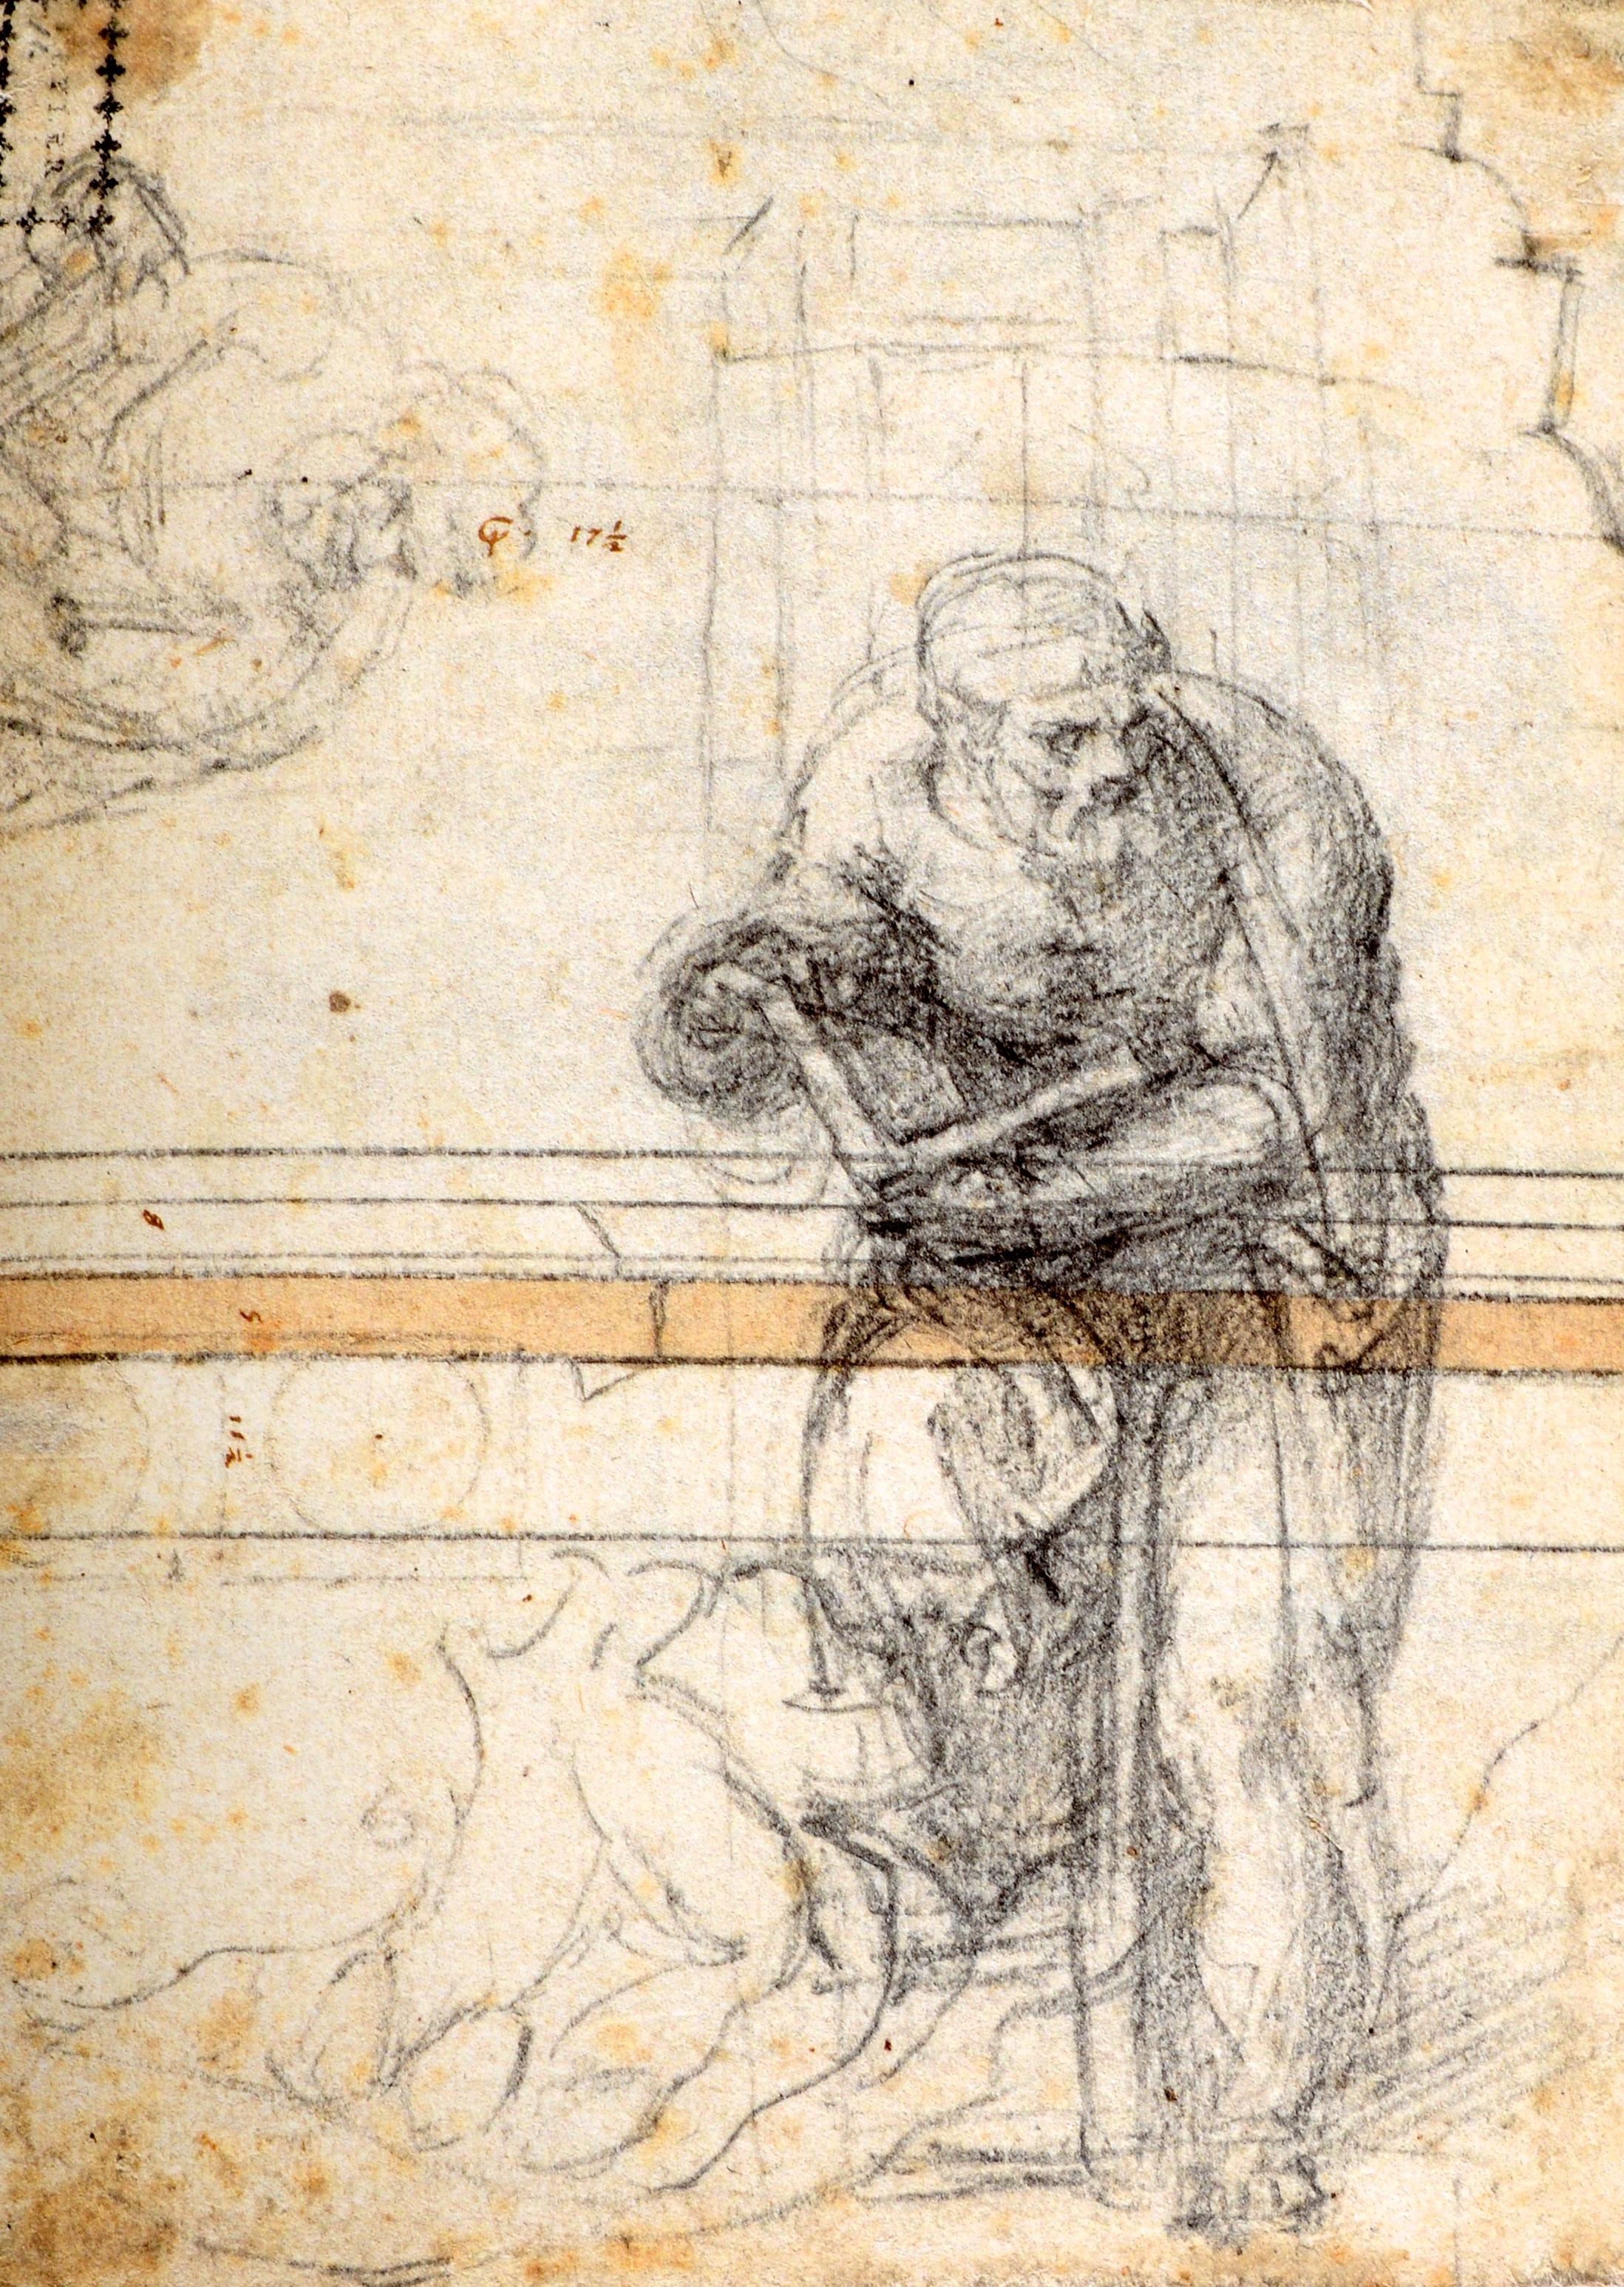 Paper Michelangelo. The Drawings of a Genius, 1st Ed Exhibition Catalog For Sale